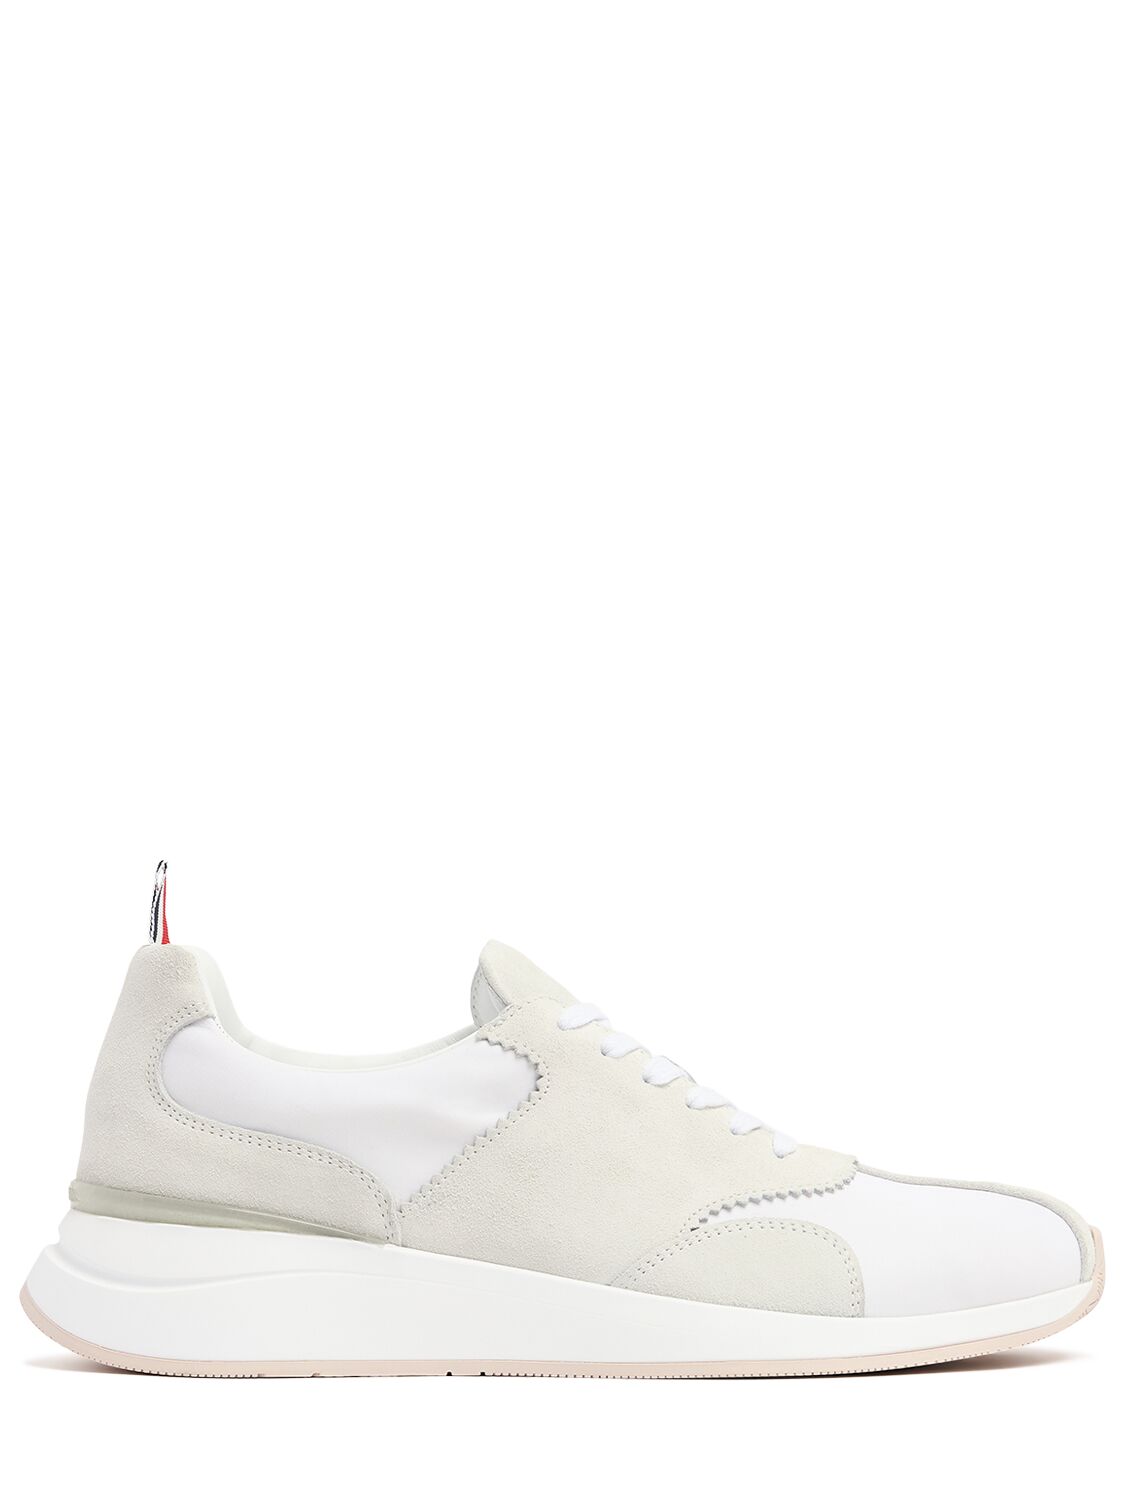 Thom Browne Sprinter Tech Low Top Trainers In White